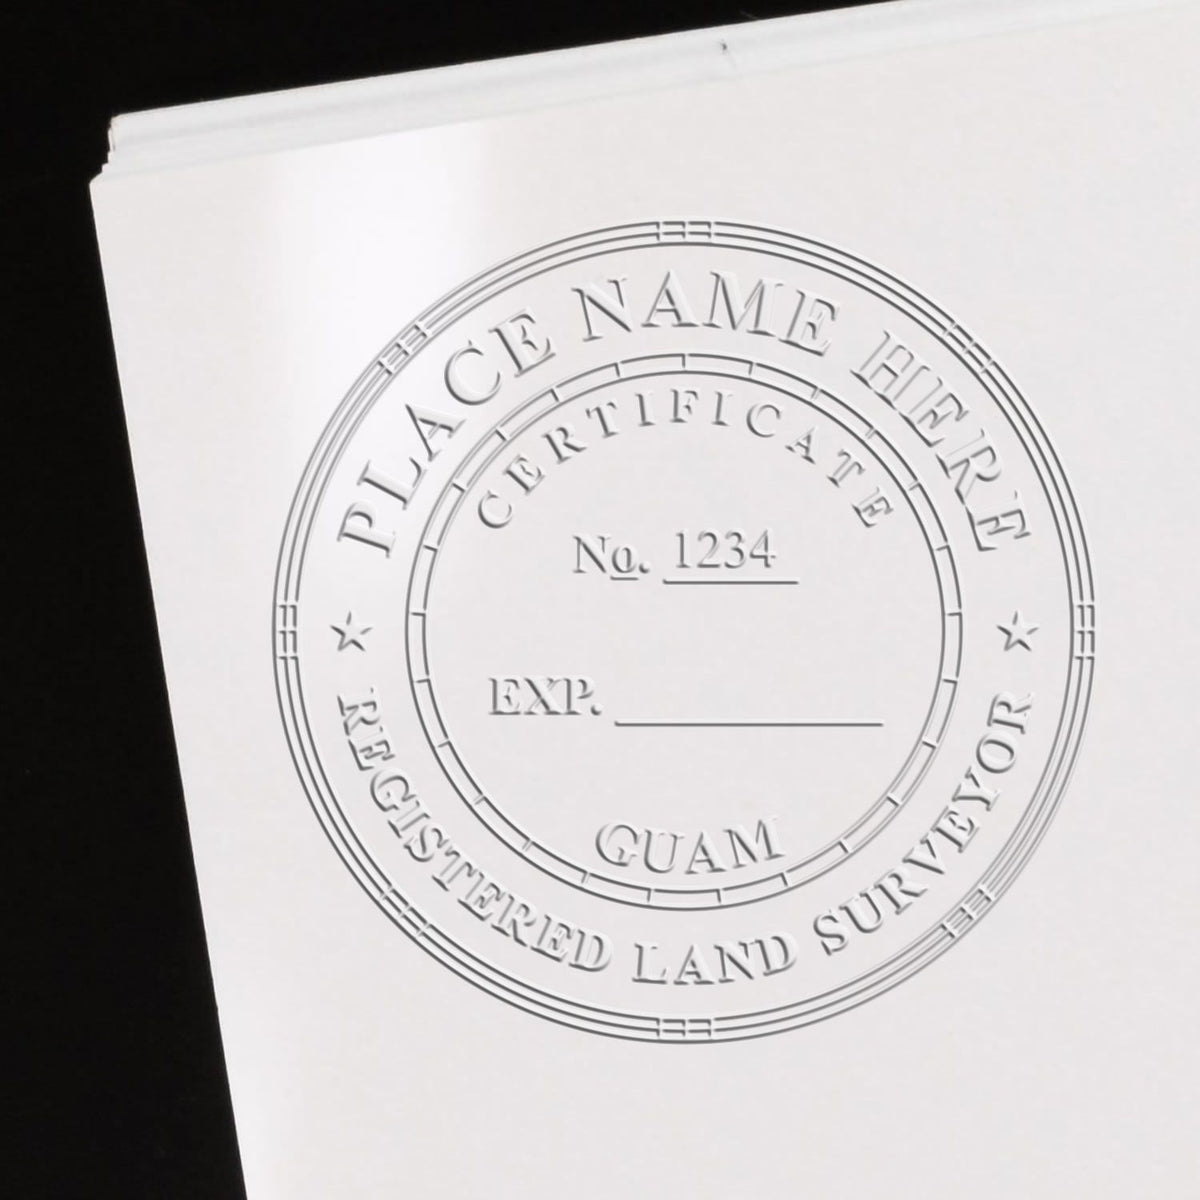 A lifestyle photo showing a stamped image of the State of Guam Soft Land Surveyor Embossing Seal on a piece of paper